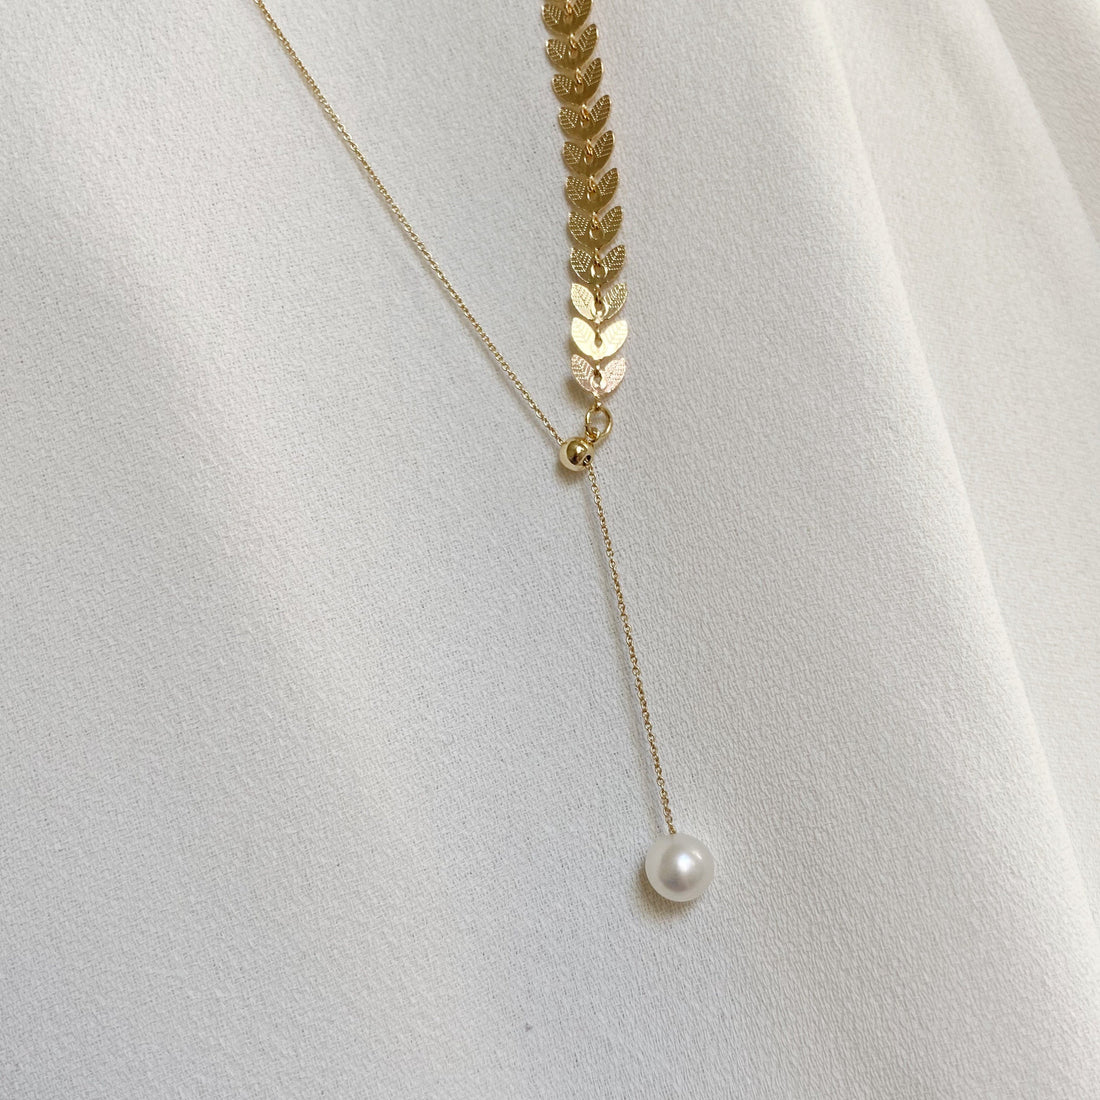 Golden Wheat Necklace with Pearl